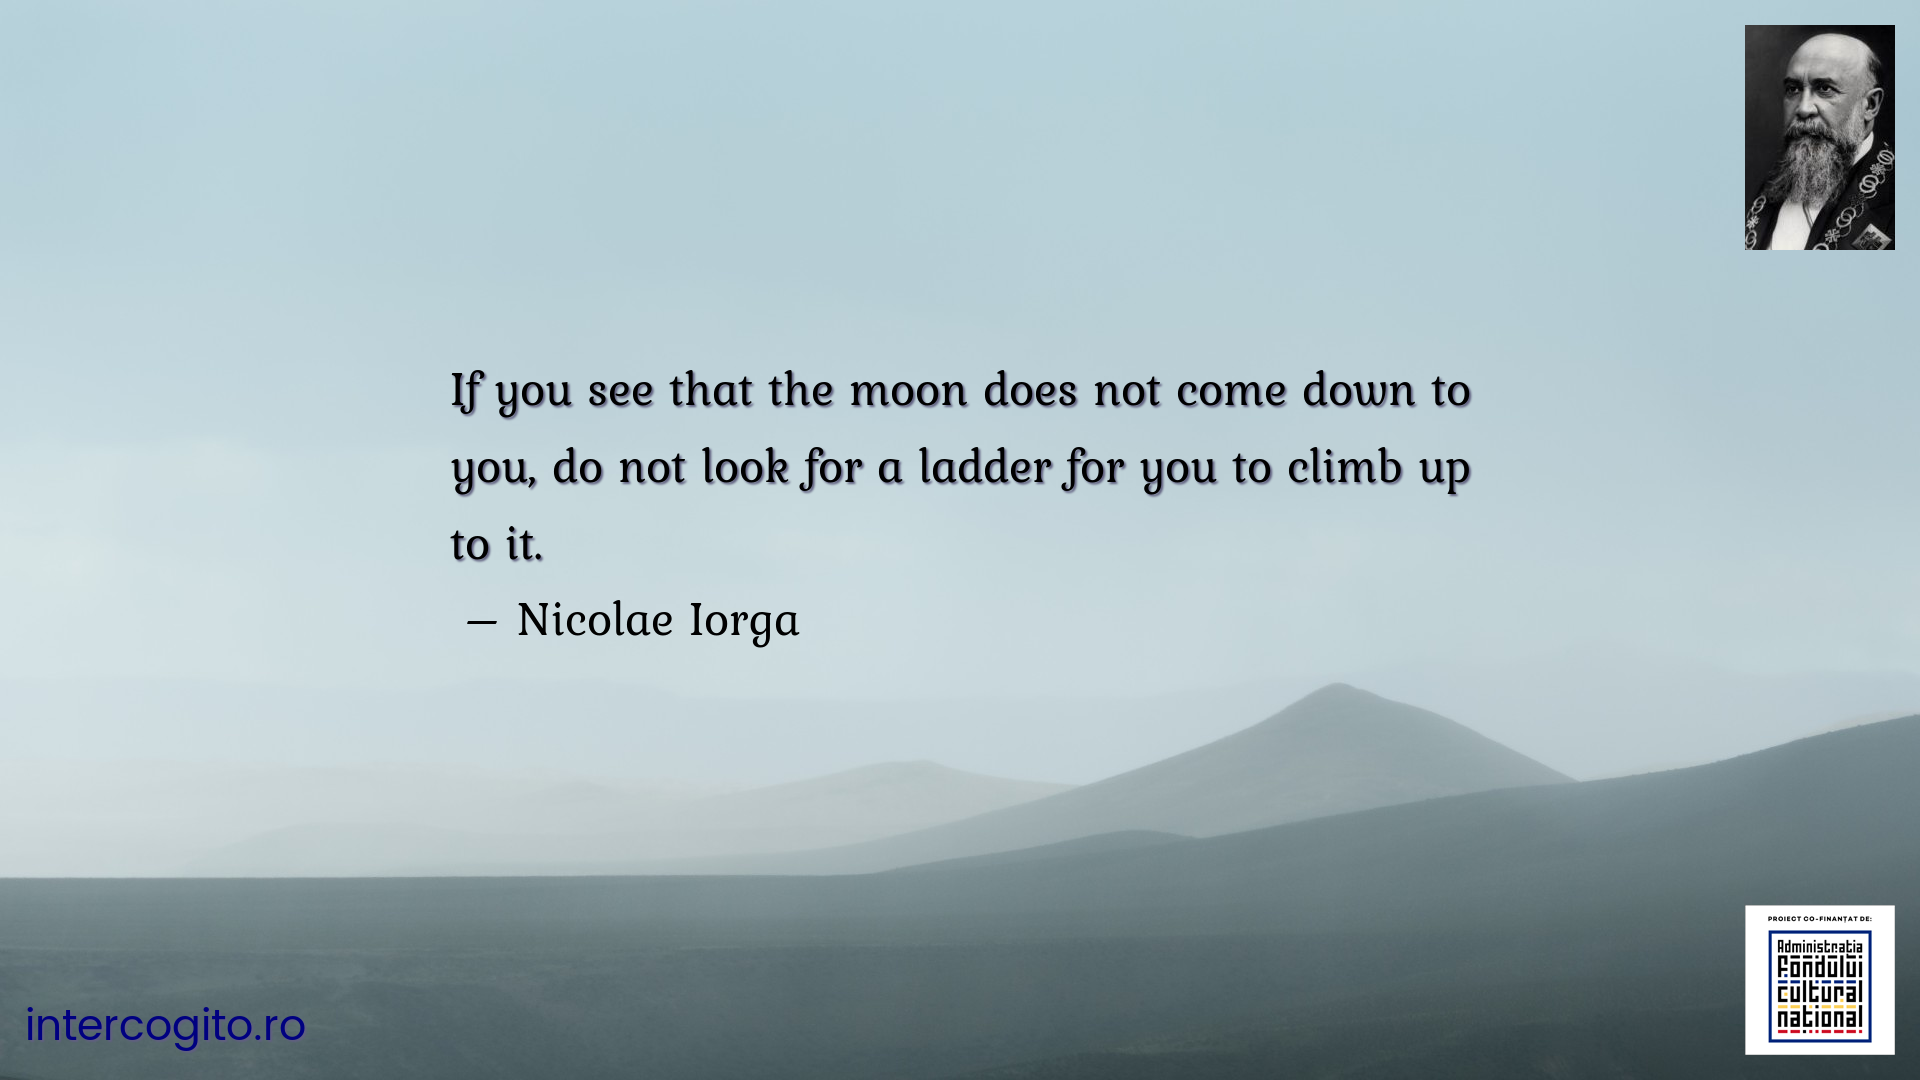 If you see that the moon does not come down to you, do not look for a ladder for you to climb up to it.